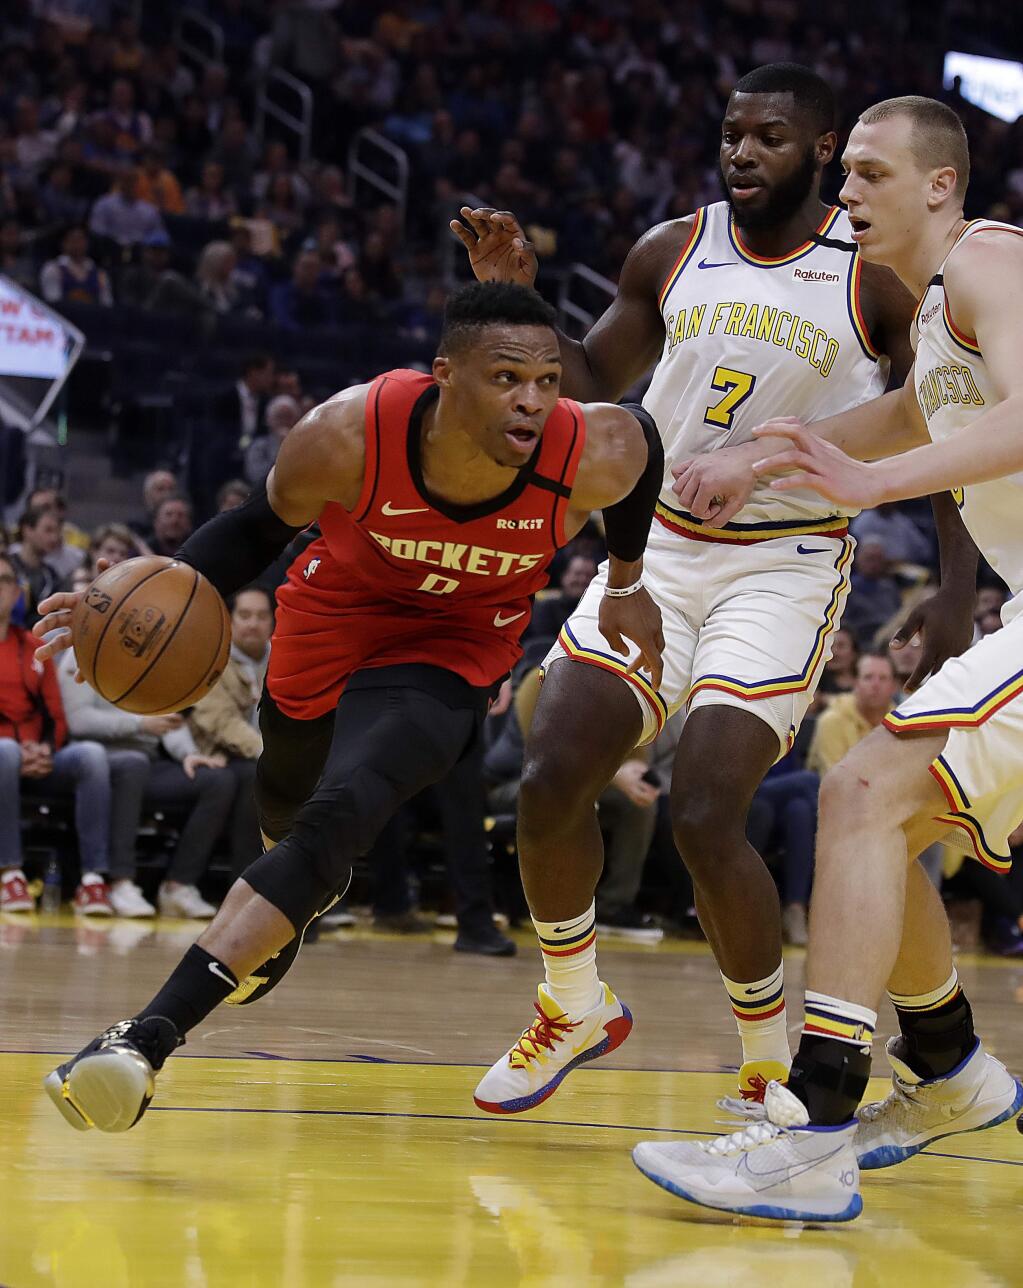 The Houston Rockets' Russell Westbrook, left, drives the ball against the Golden State Warriors' Eric Paschall (7) and Alen Smailagic, right, during the first half Thursday, Feb. 20, 2020, in San Francisco. (AP Photo/Ben Margot)